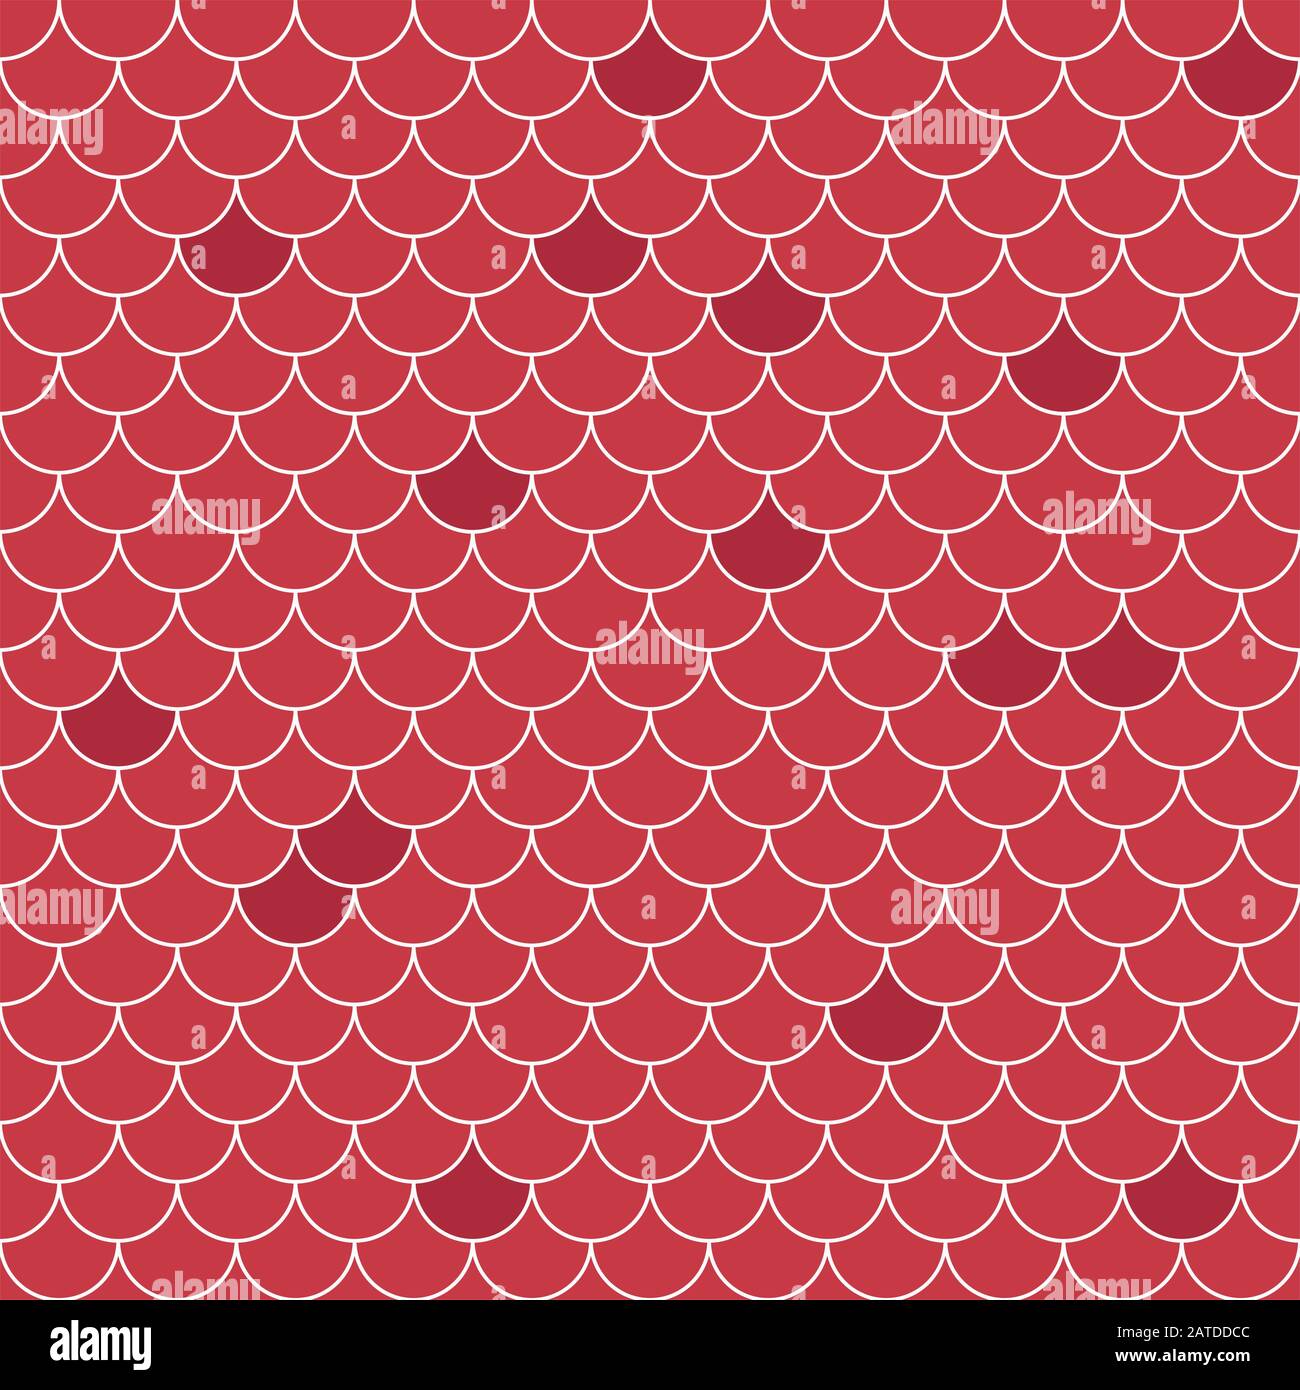 Red and pink mermaid scale seamless pattern Vector Image